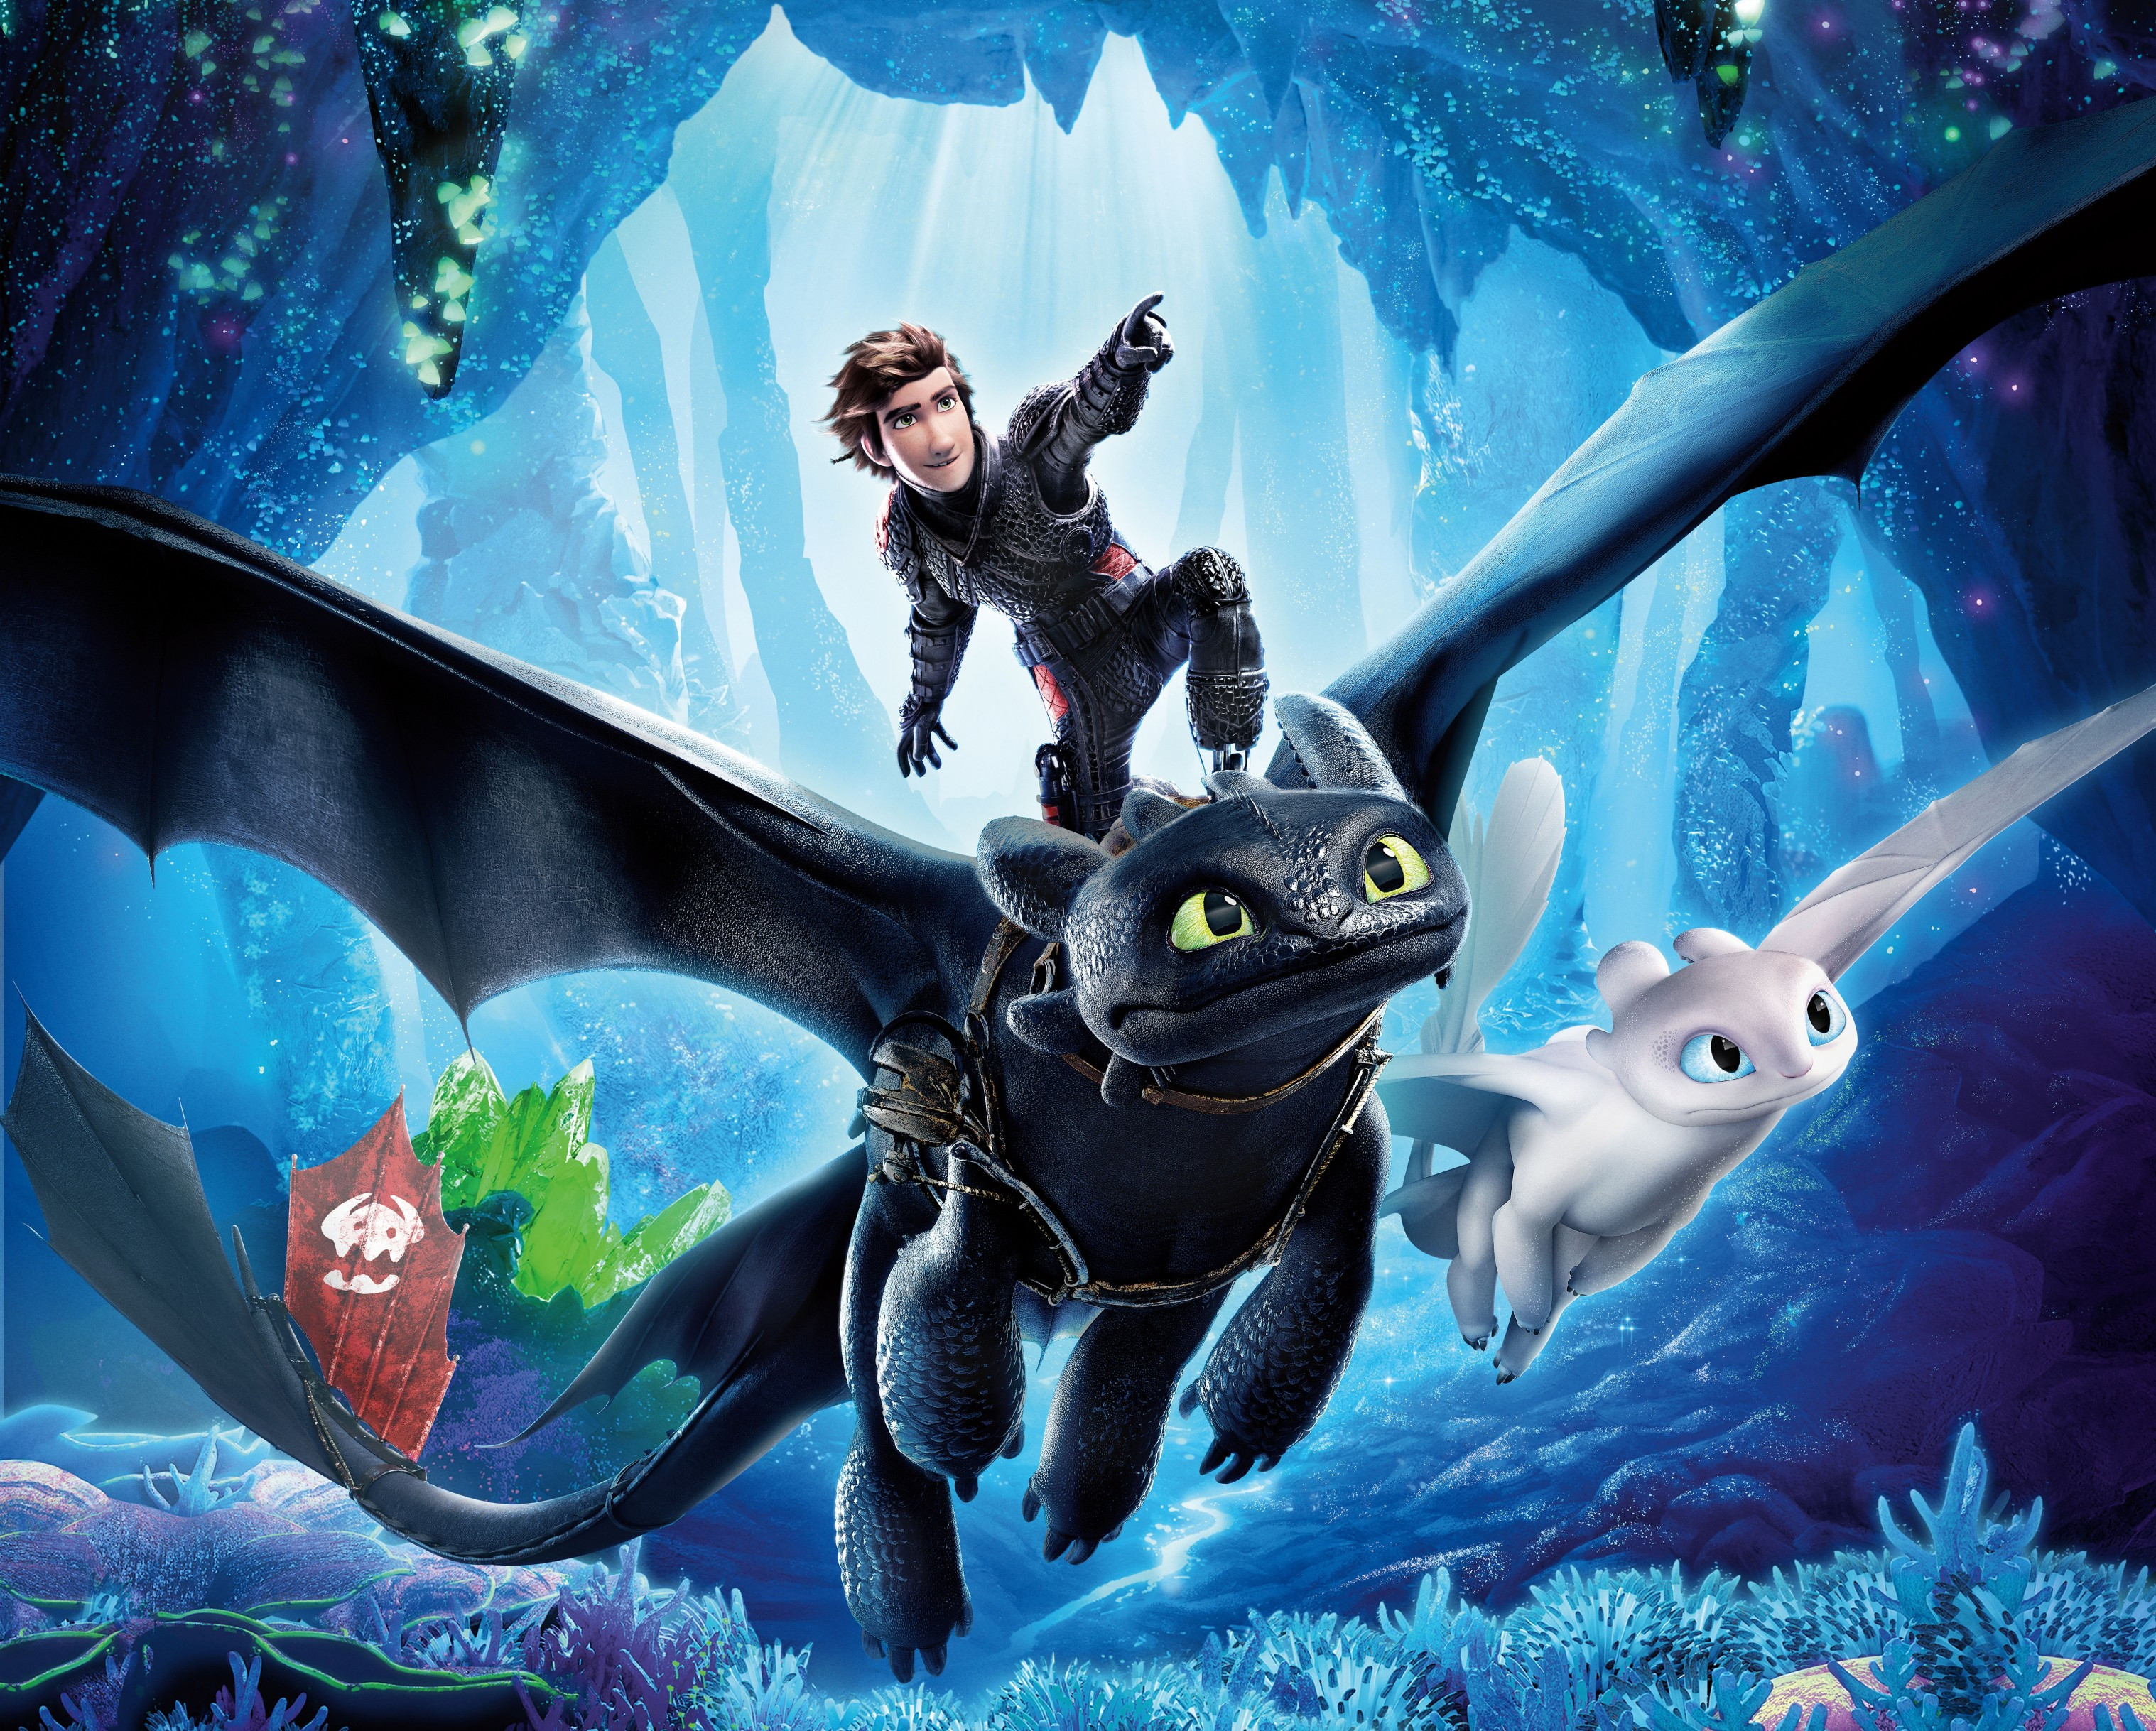 Download 3035x2437 How To Train Your Dragon: The Hidden World, Animation, Toothless Wallpaper